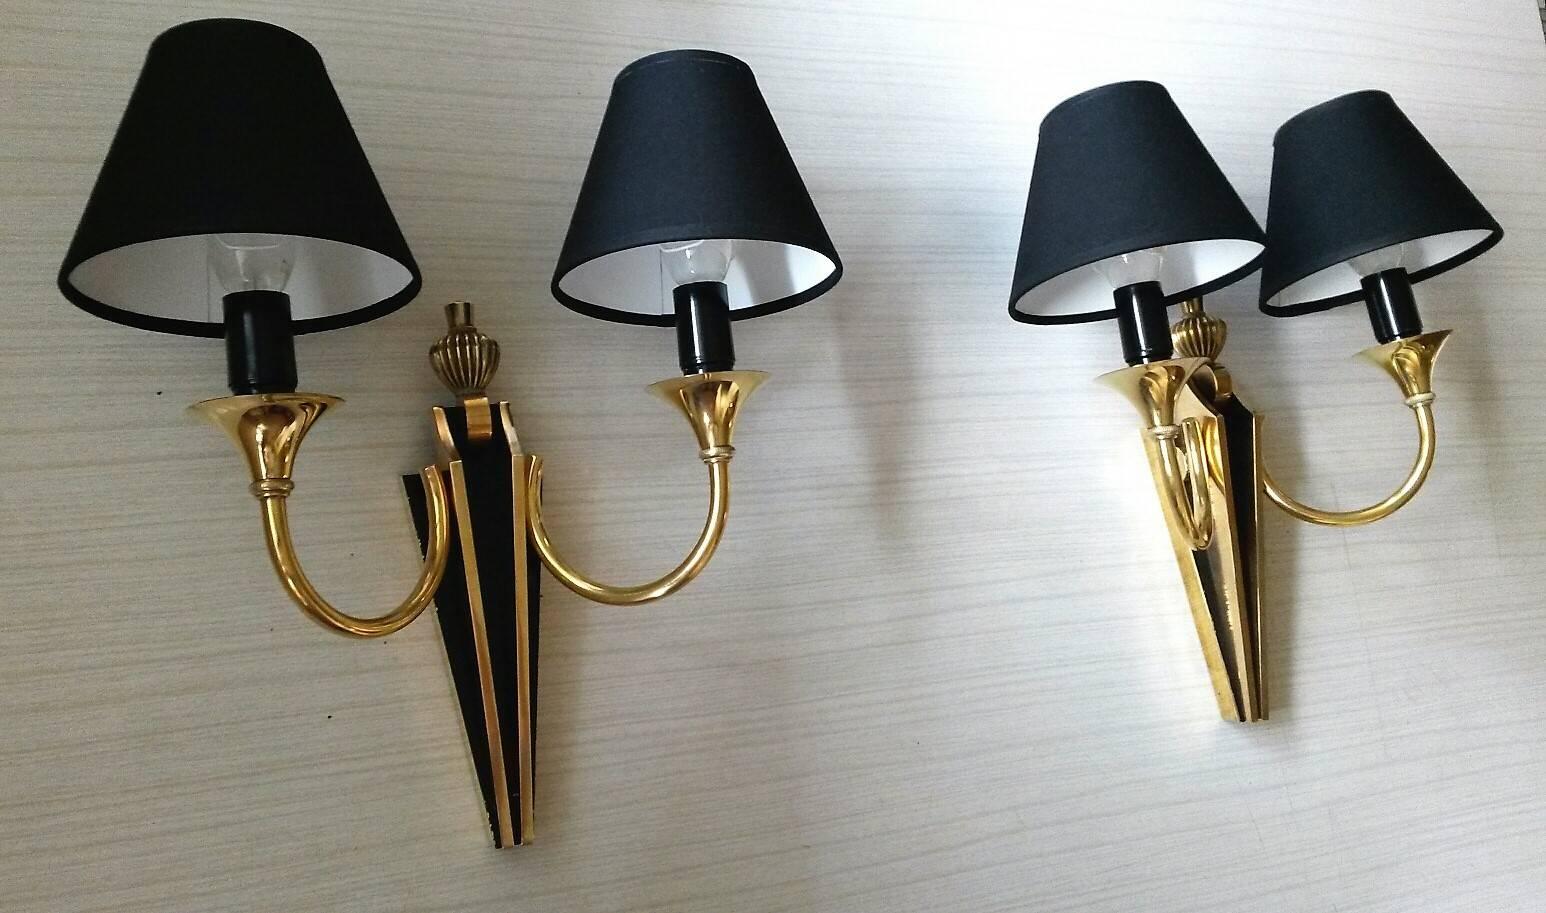 Mid-20th Century Stunning French Neoclassical Style Pair of Two-Arm Sconces by Maison Jansen For Sale